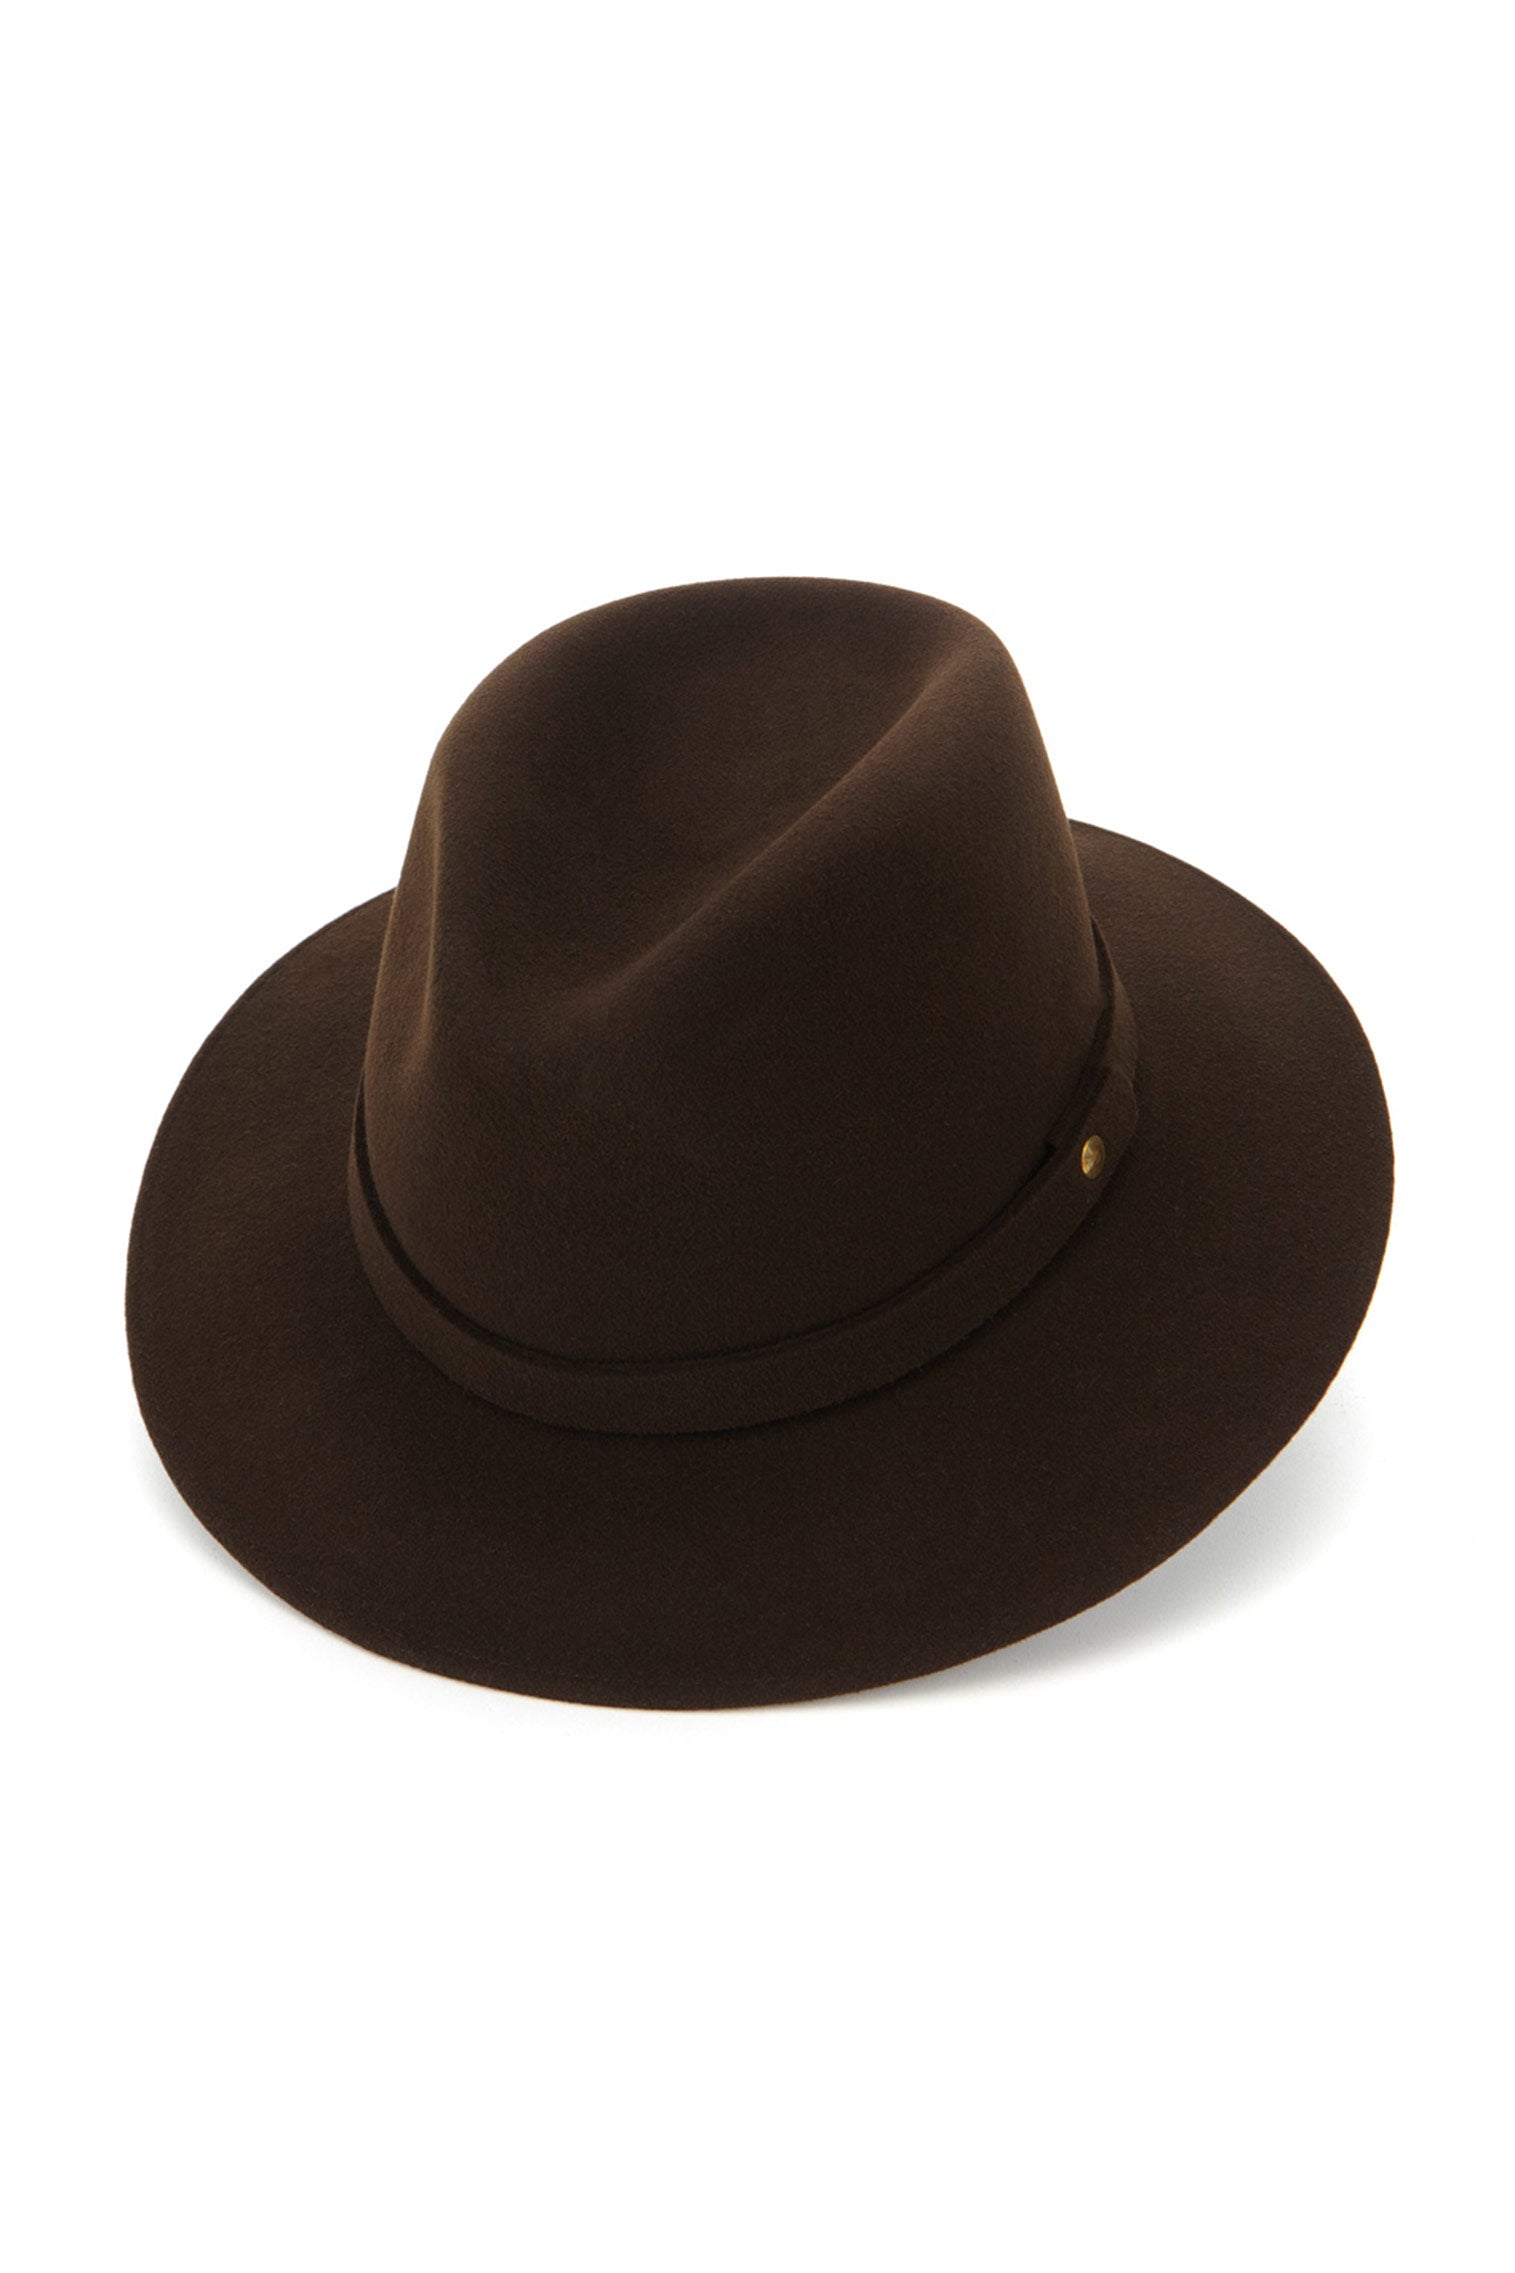 Nomad Rollable Trilby - Father's Day Gift Guide - Lock & Co. Hatters London UK